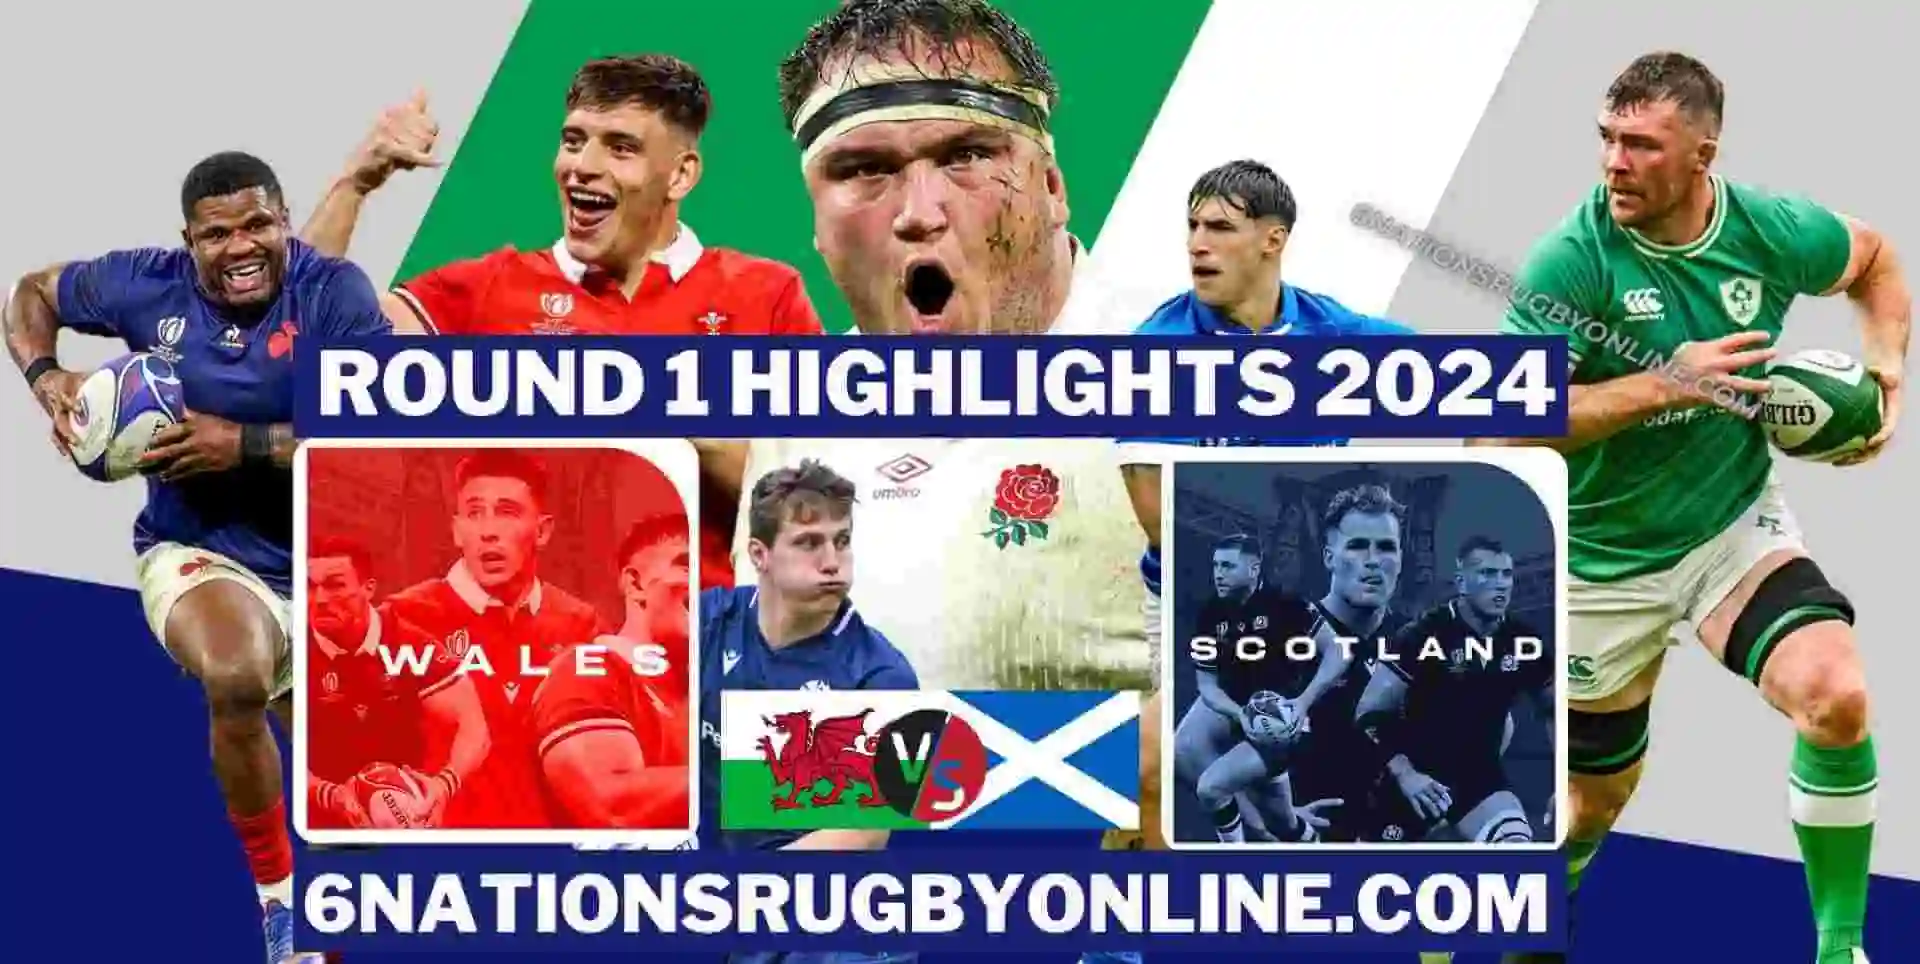 Wales Vs Scotland Rugby Highlights 2024 Round 1